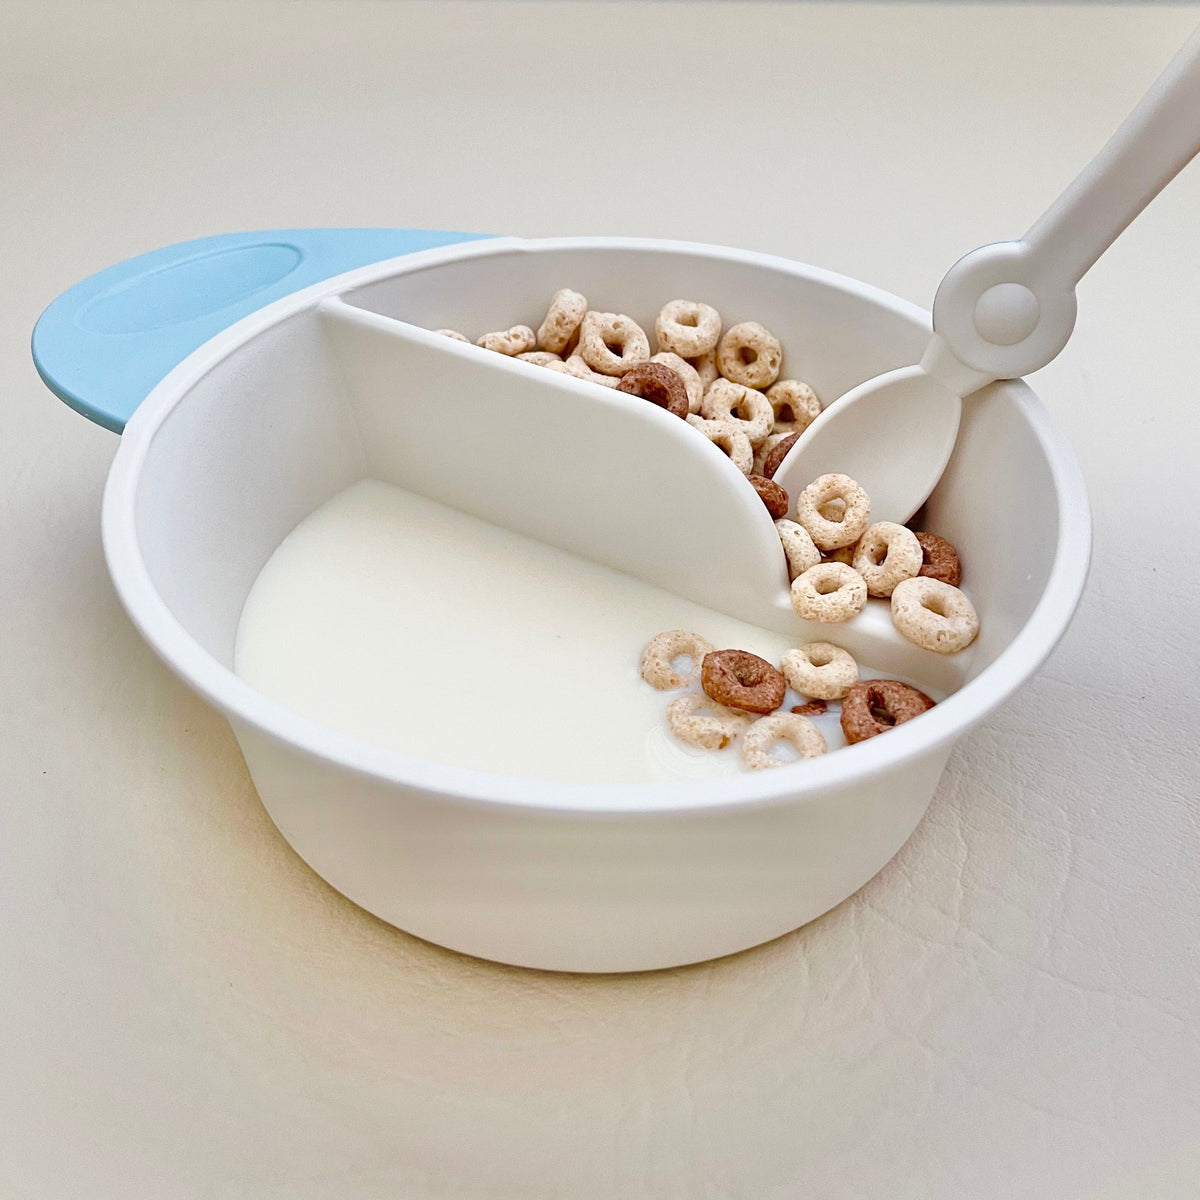 Fun Bowl Sectioned Cereal Bowl with Beige Handle